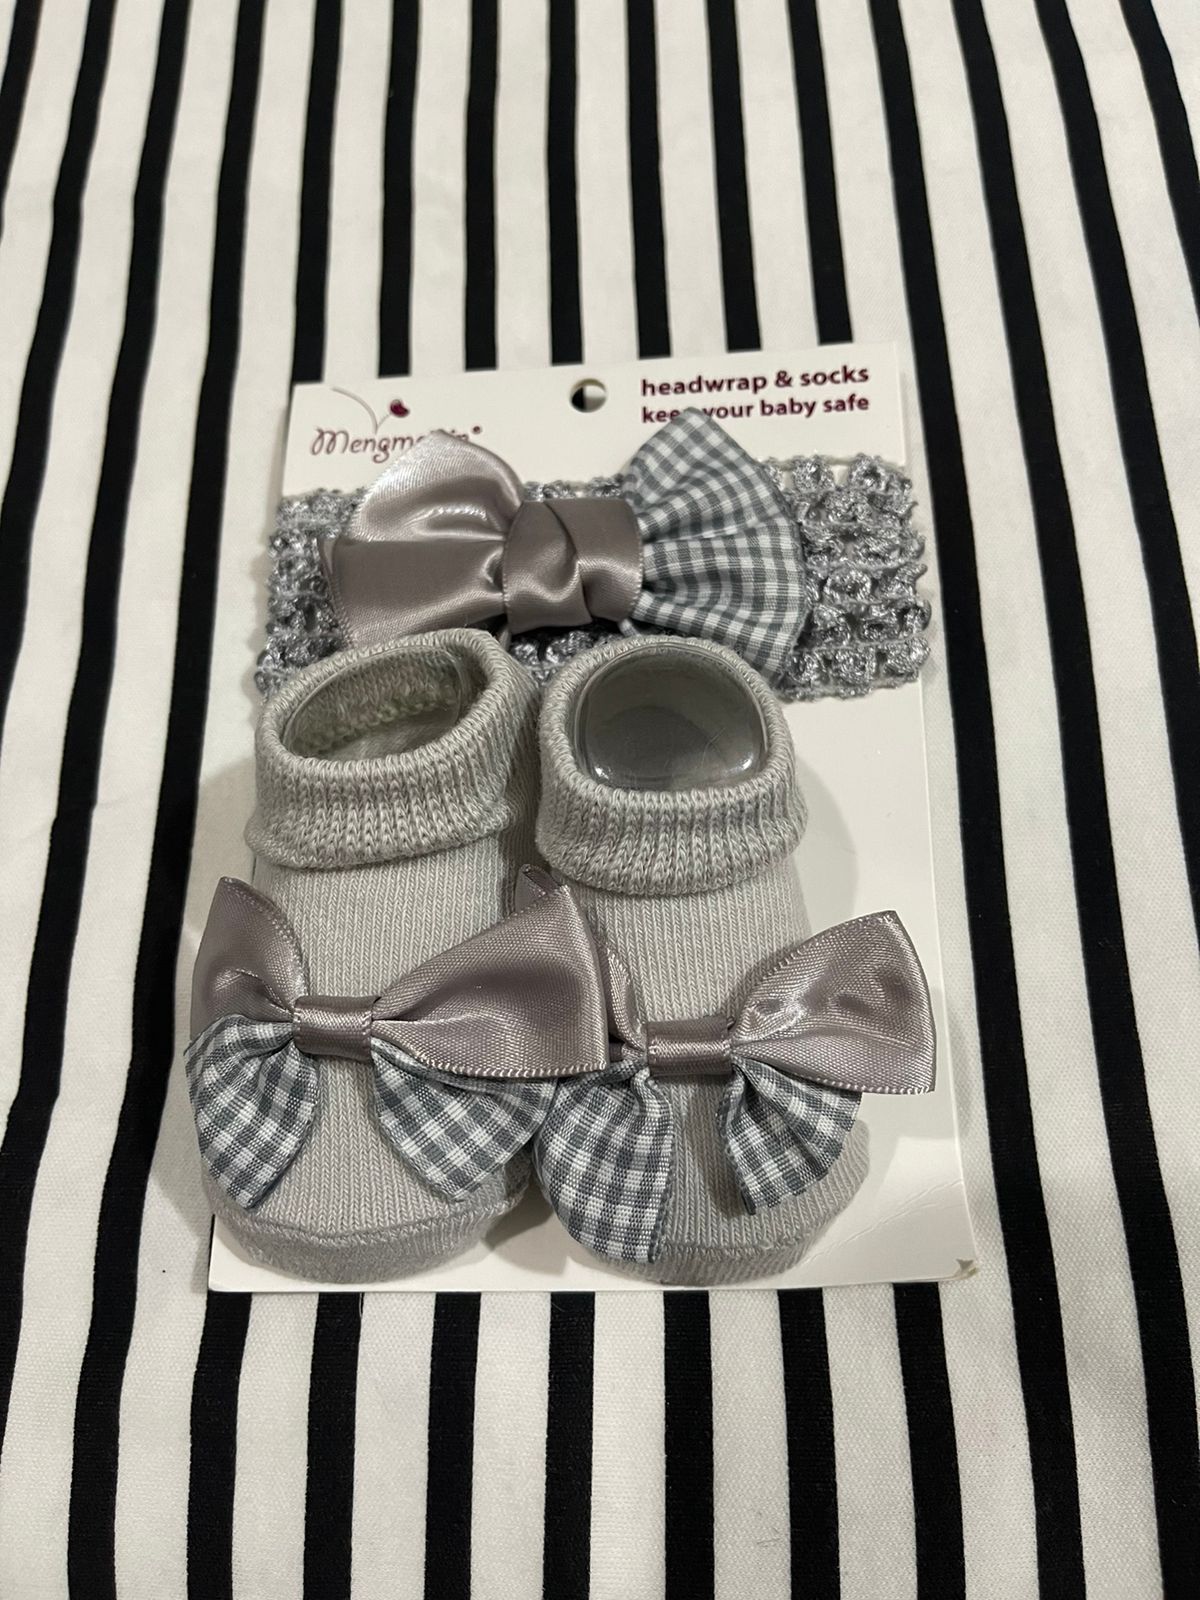 Grey socks and head band for little princess